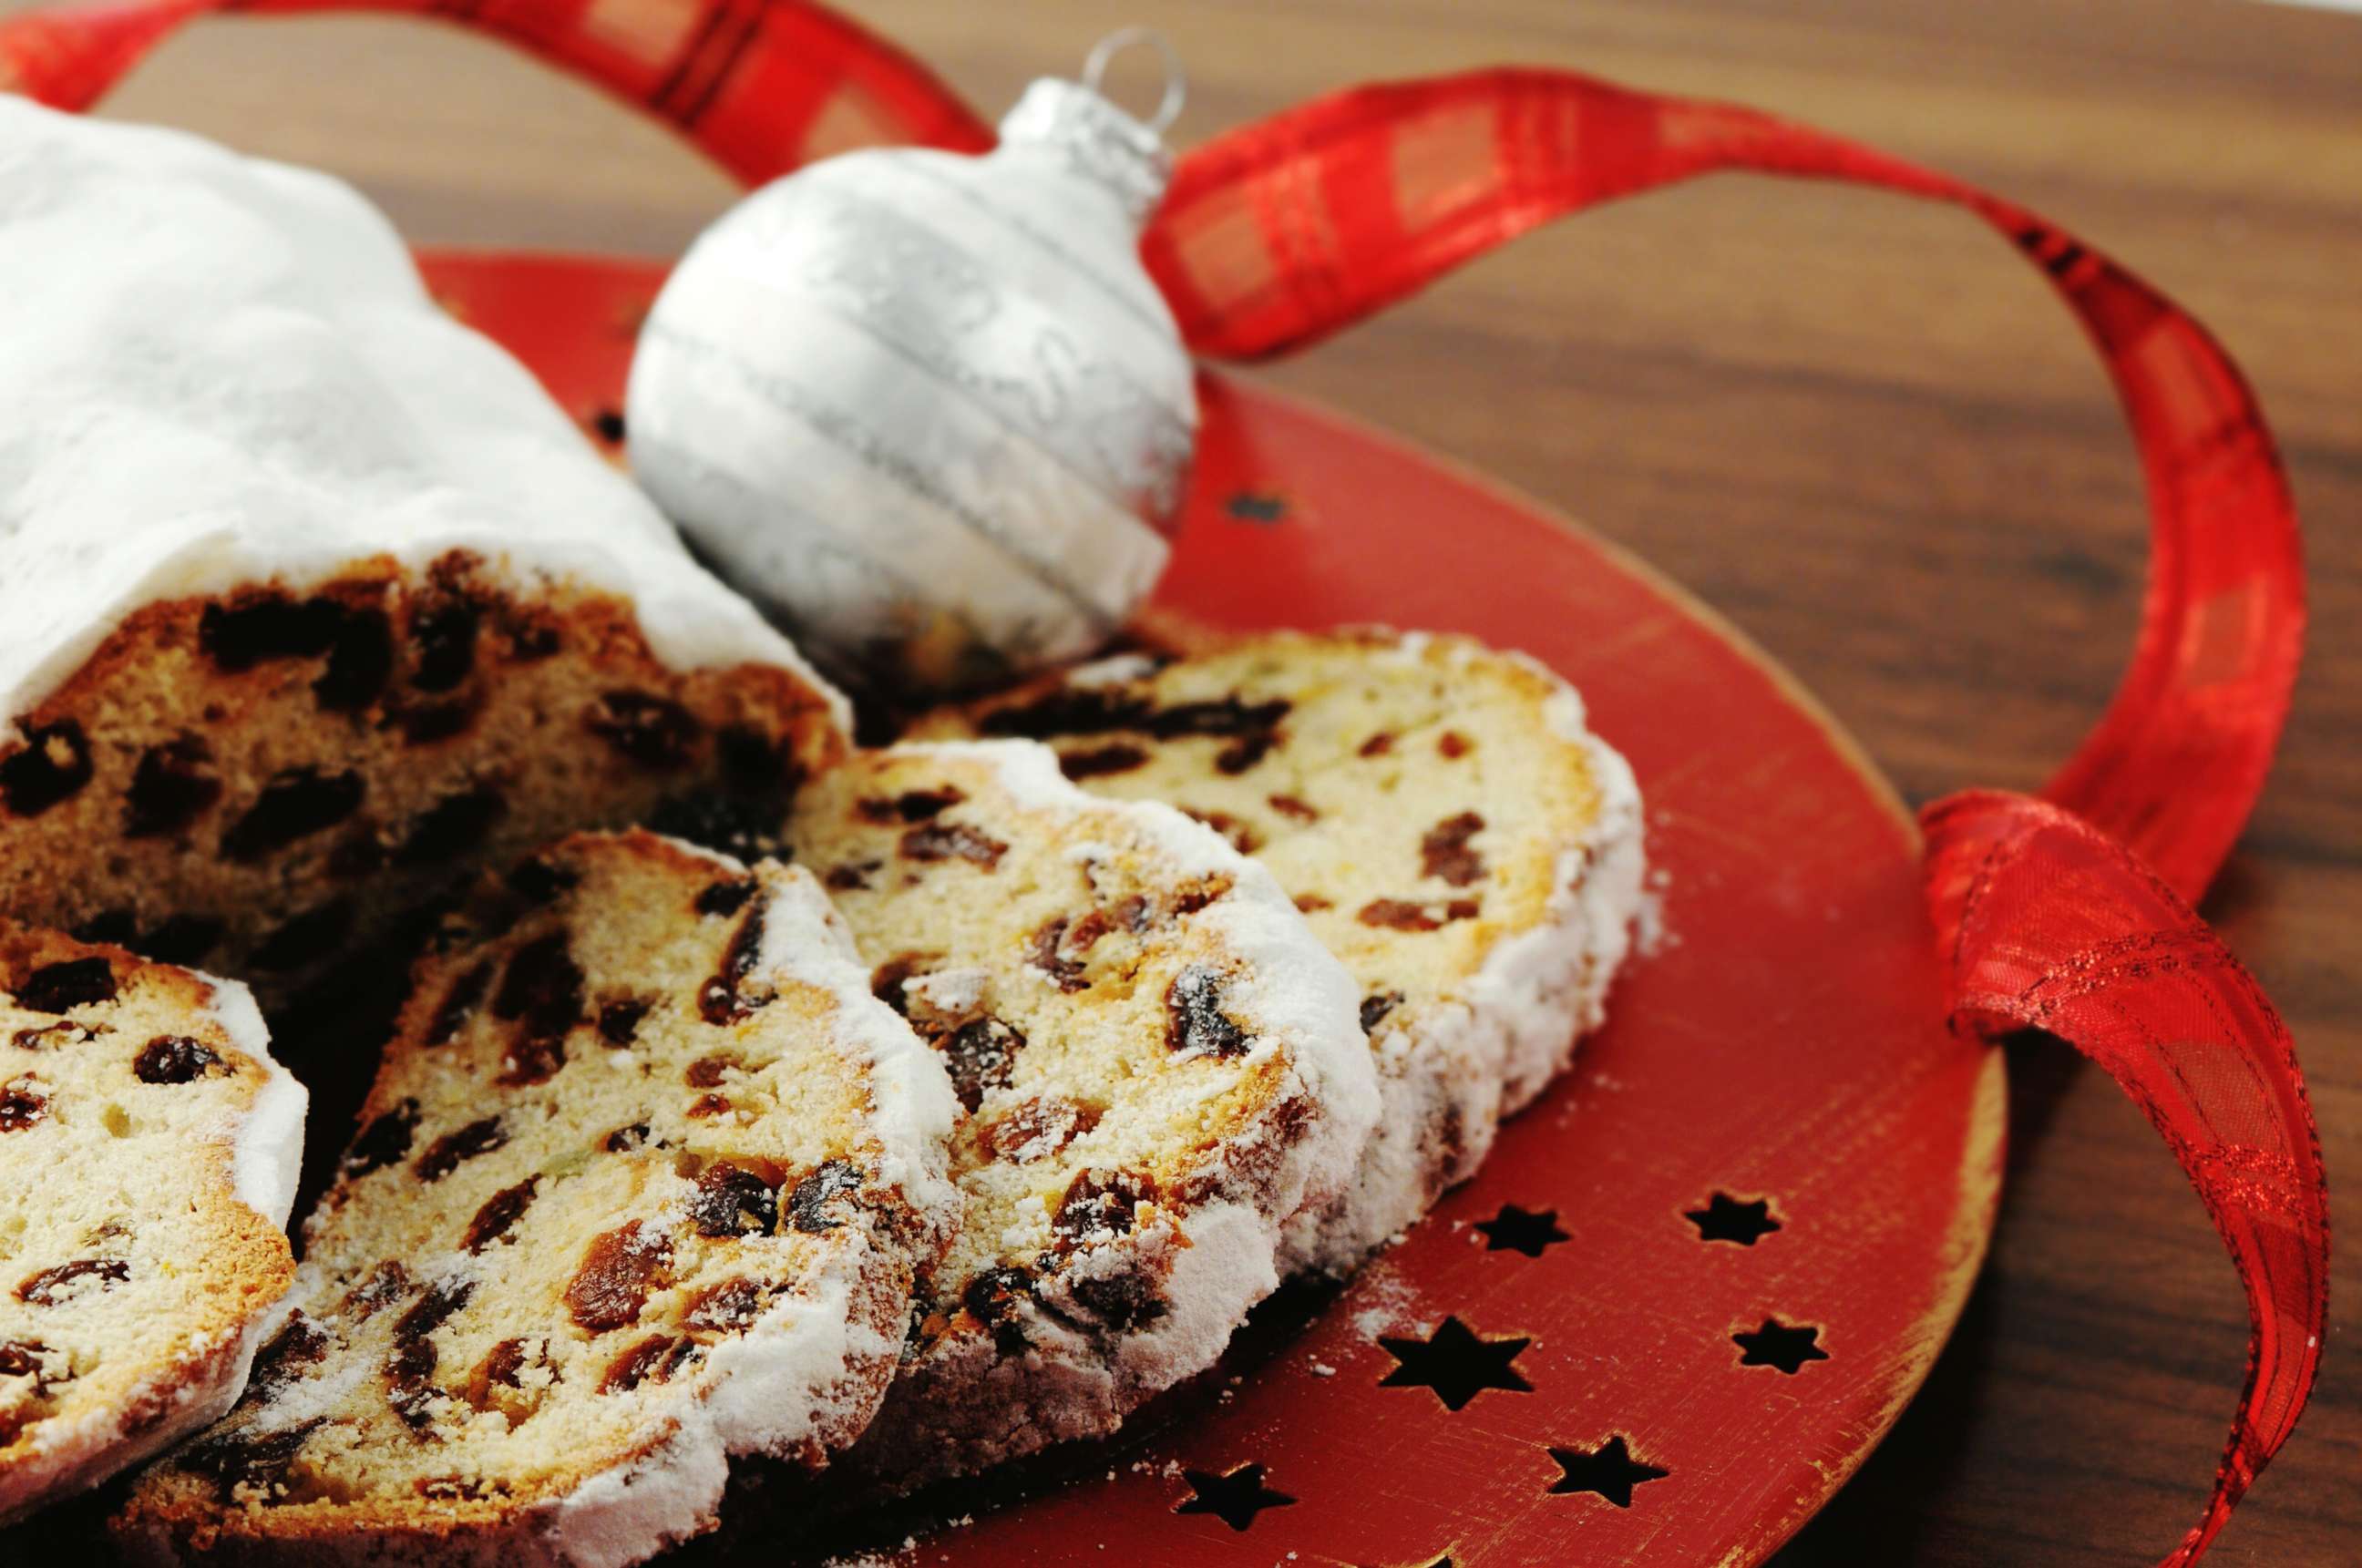 PHOTO: Christmas stollen dessert on a plate in this undated stock photo.